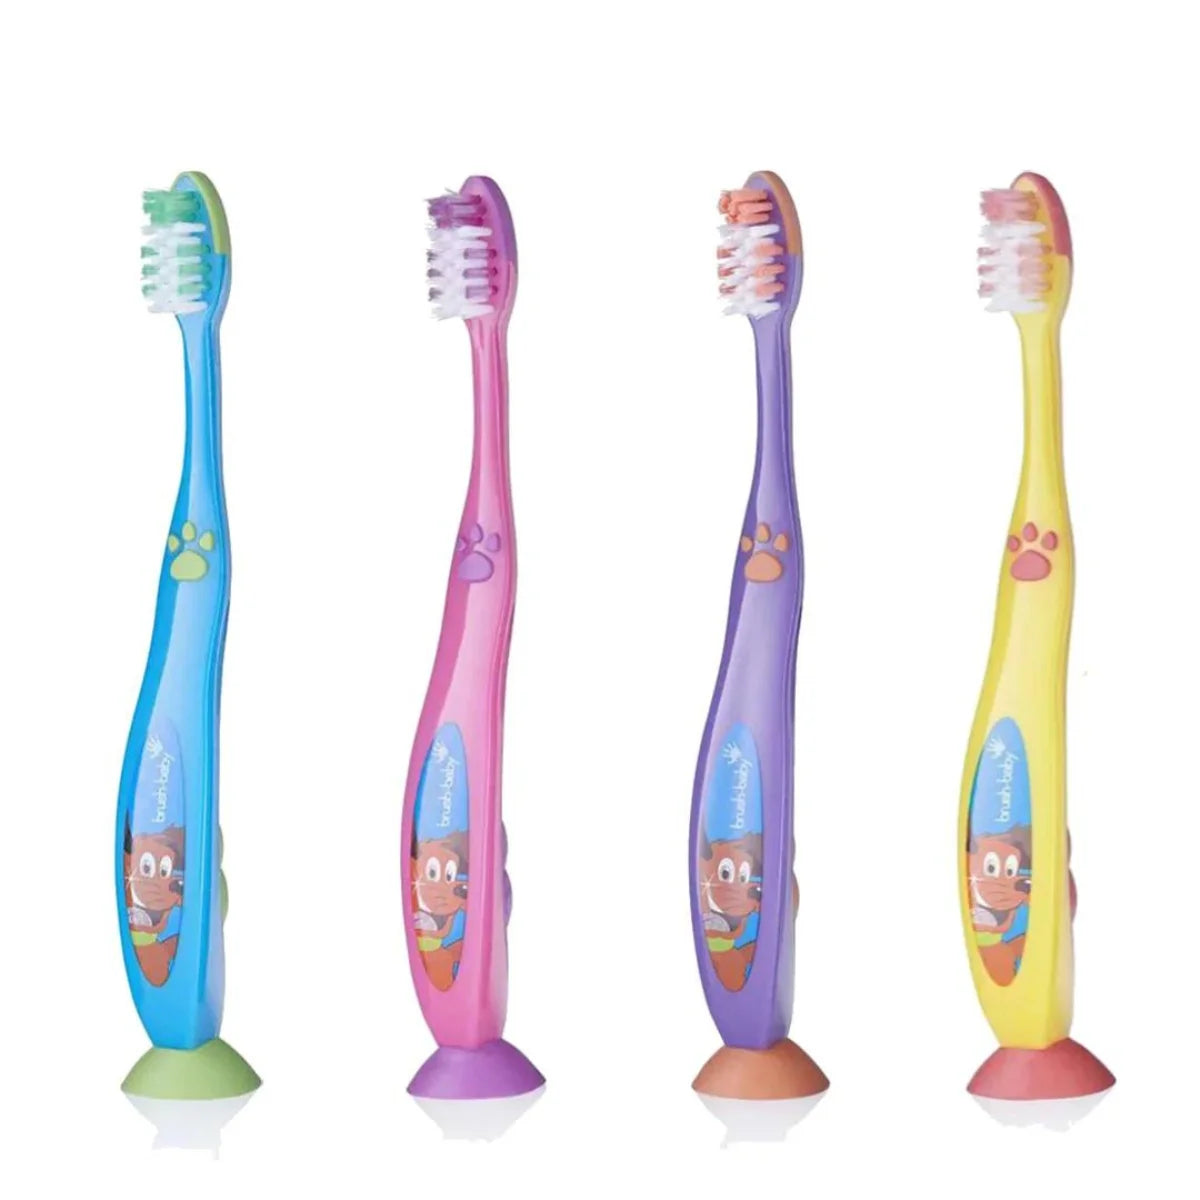 best children toothbrush 'the flossbrush bristles toothbrush by brush-baby' for 6 years and older in blue, pink, purple and yellow